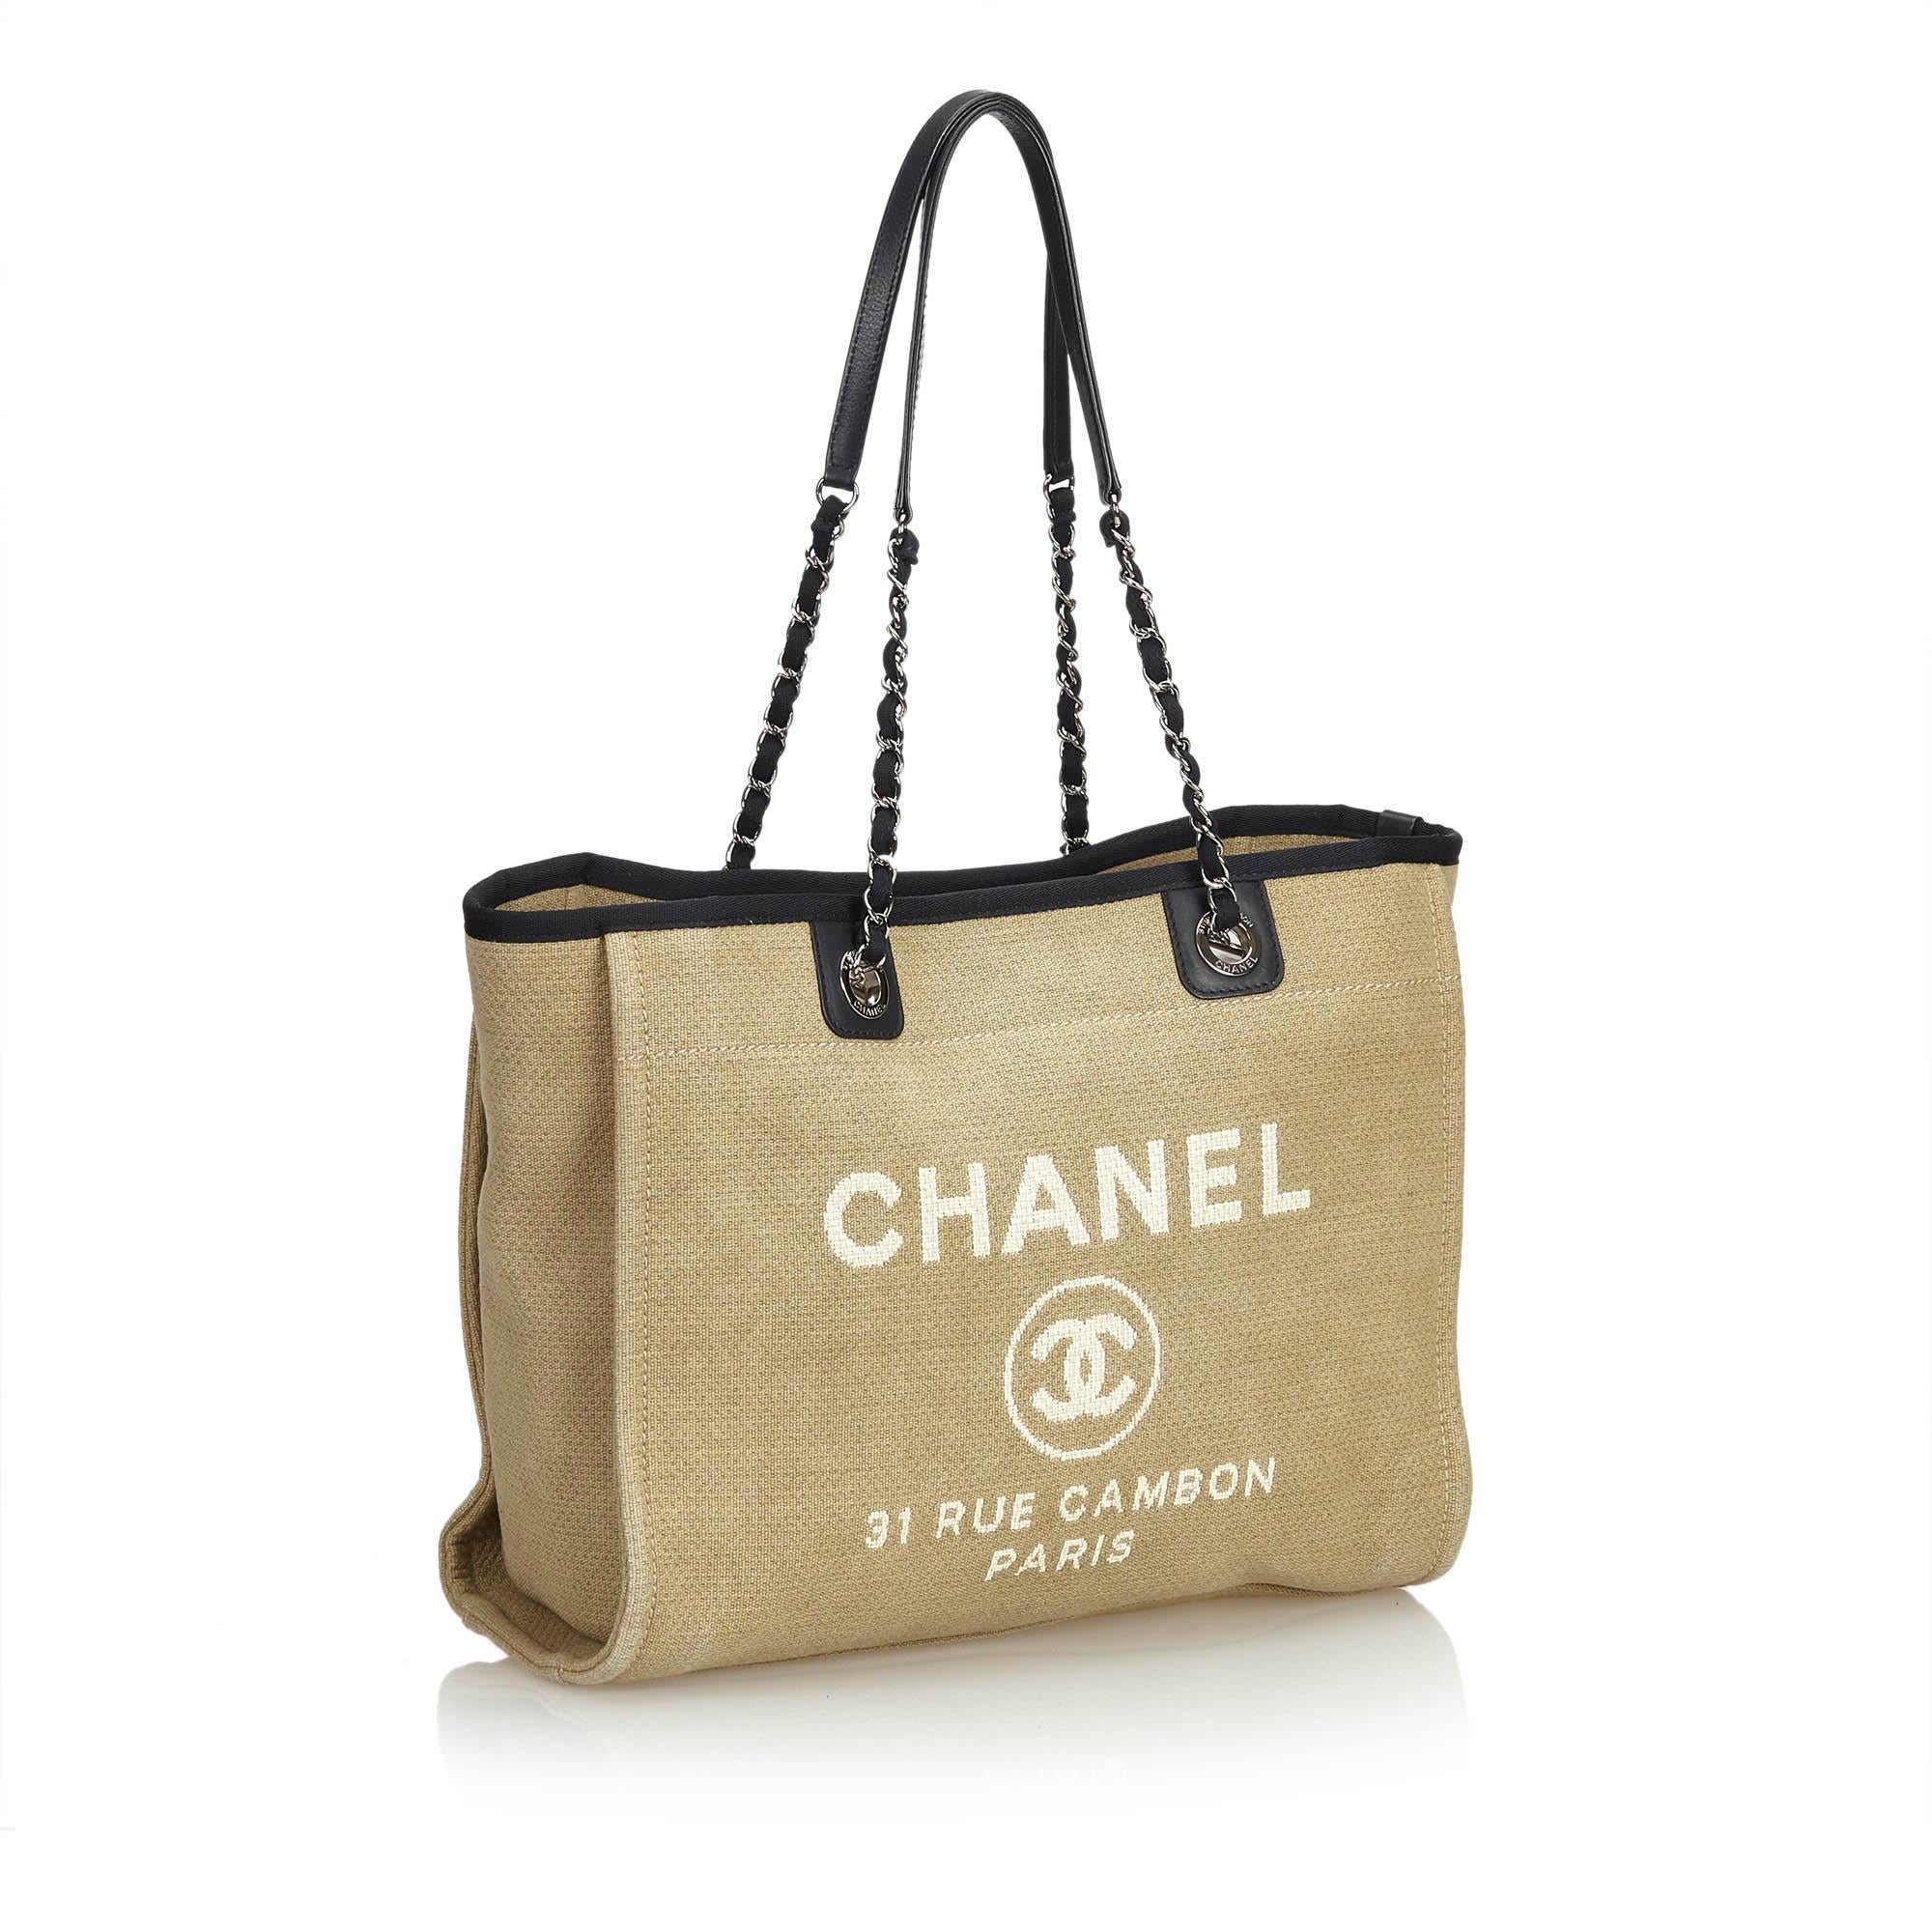 The Chanel Small Deauville logo tote bag features a canvas body, rolled black leather handle with silver-tone chain, an open top, and an interior zip and slip pocket. Comes with dust bag. 

Serial number: 16088717
Strap drop: 25cm
